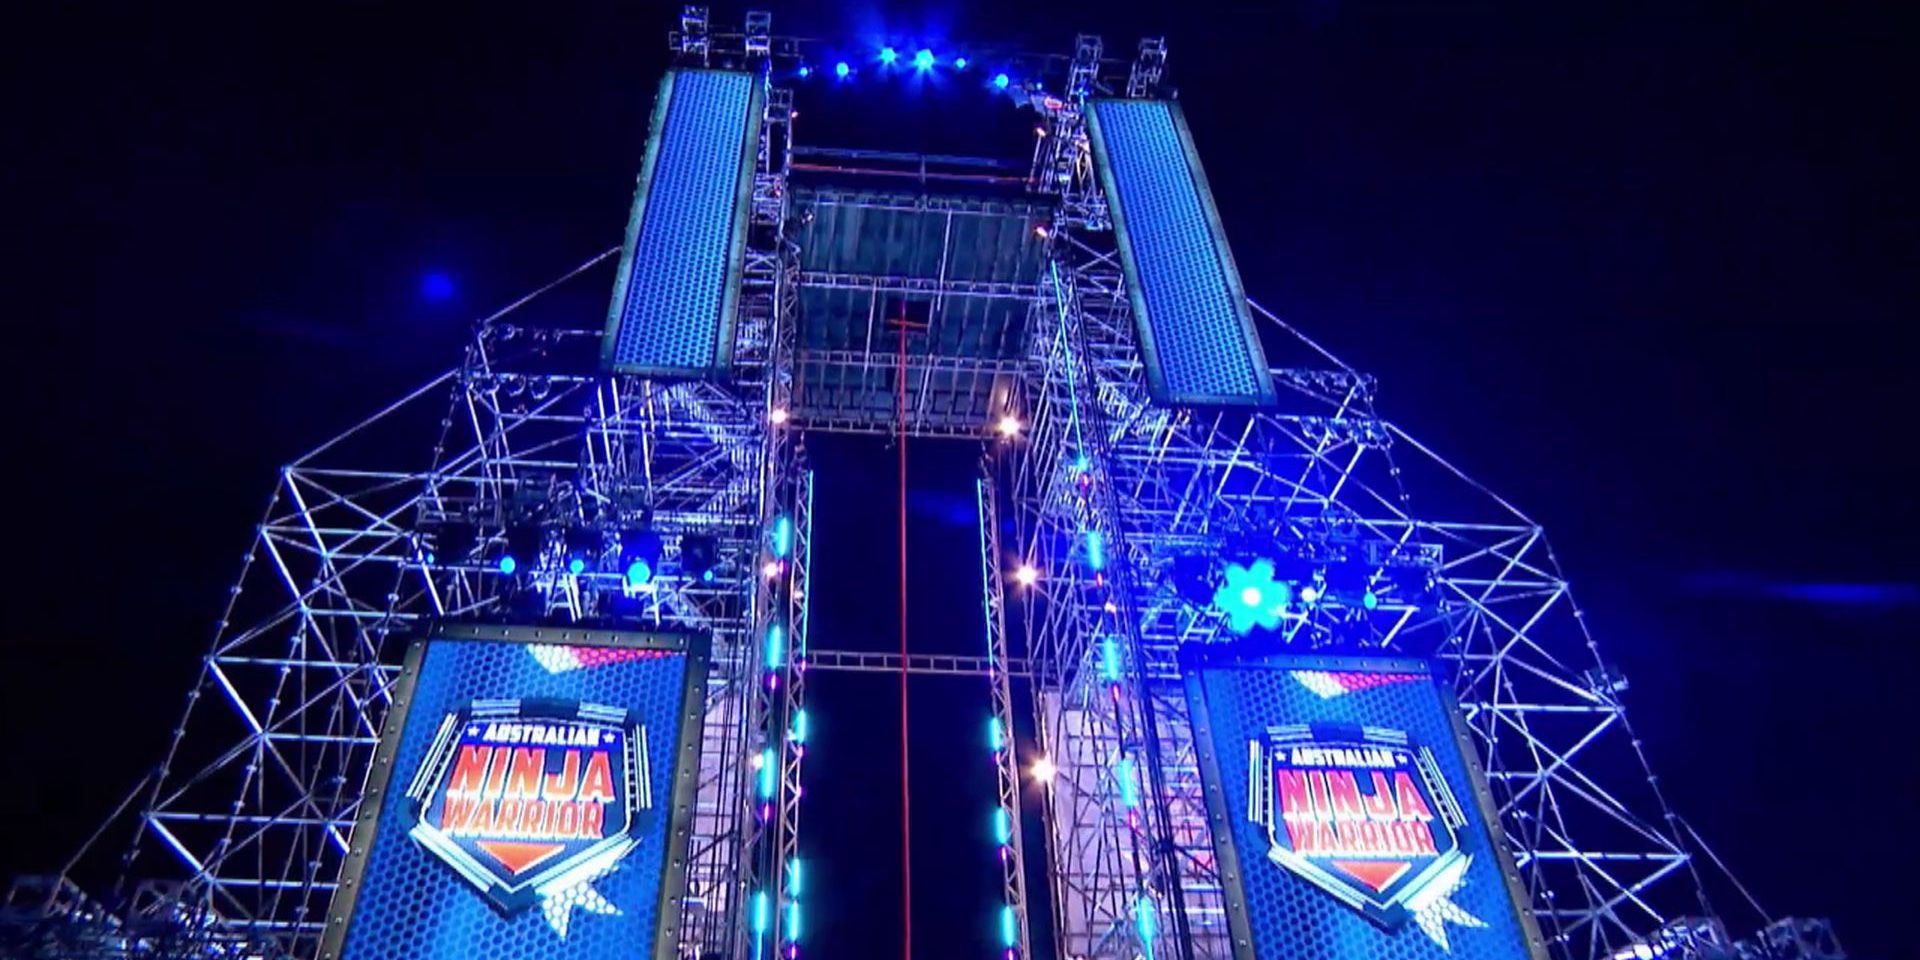 American Ninja Warrior How Season 13 Will Be Back to Normal (& How It Wont)